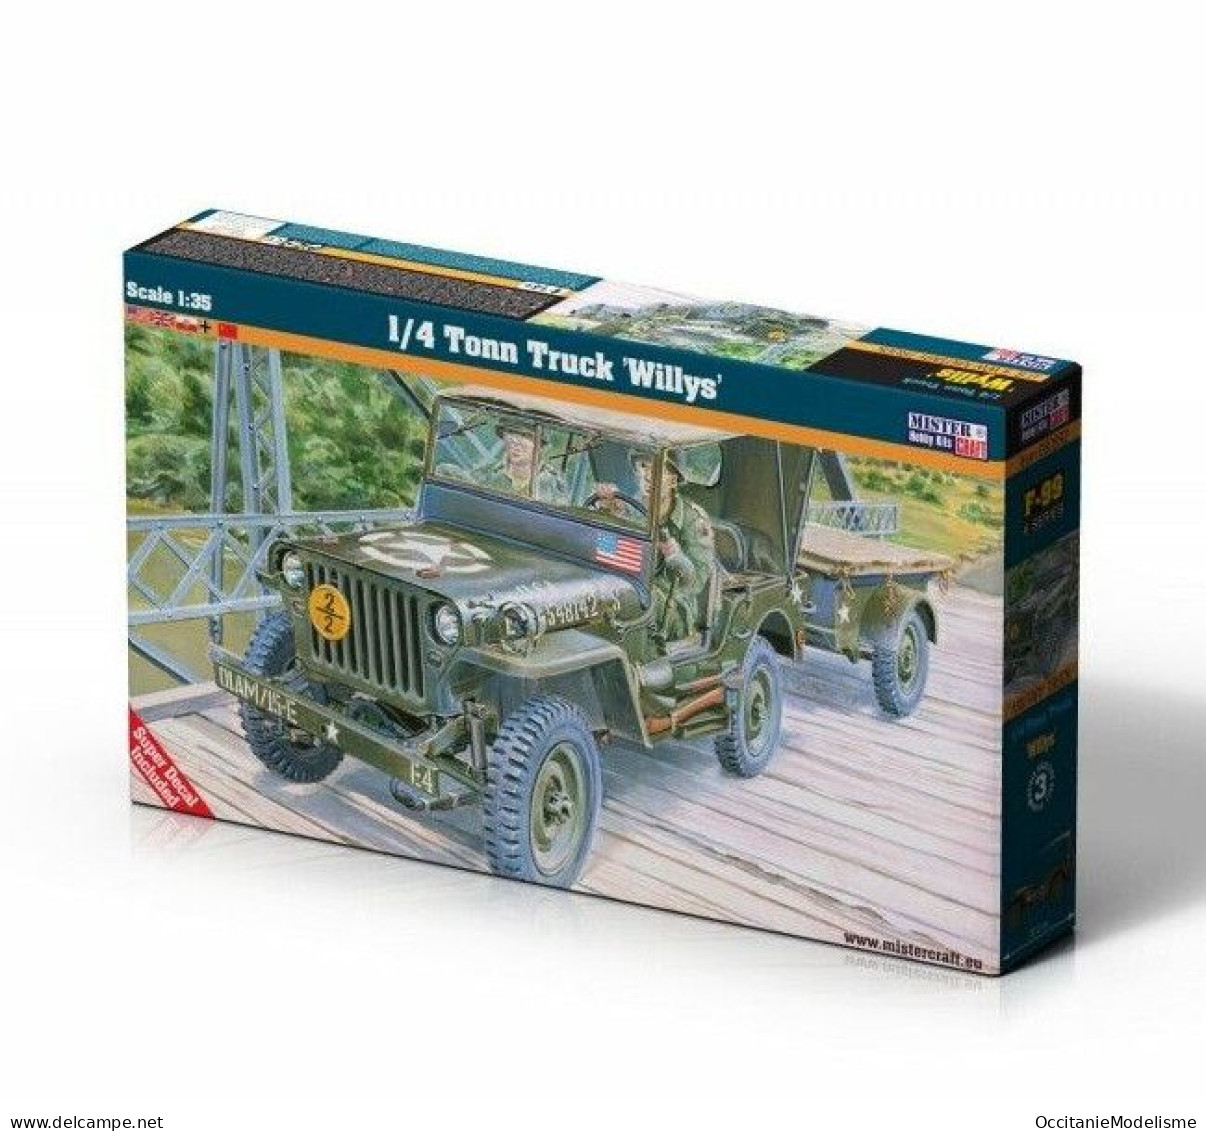 MisterCraft - WILLYS JEEP 1/4 Ton Truck + Trailer Maquette Kit Plastique Réf. F-299 Neuf NBO 1/35 - Véhicules Militaires